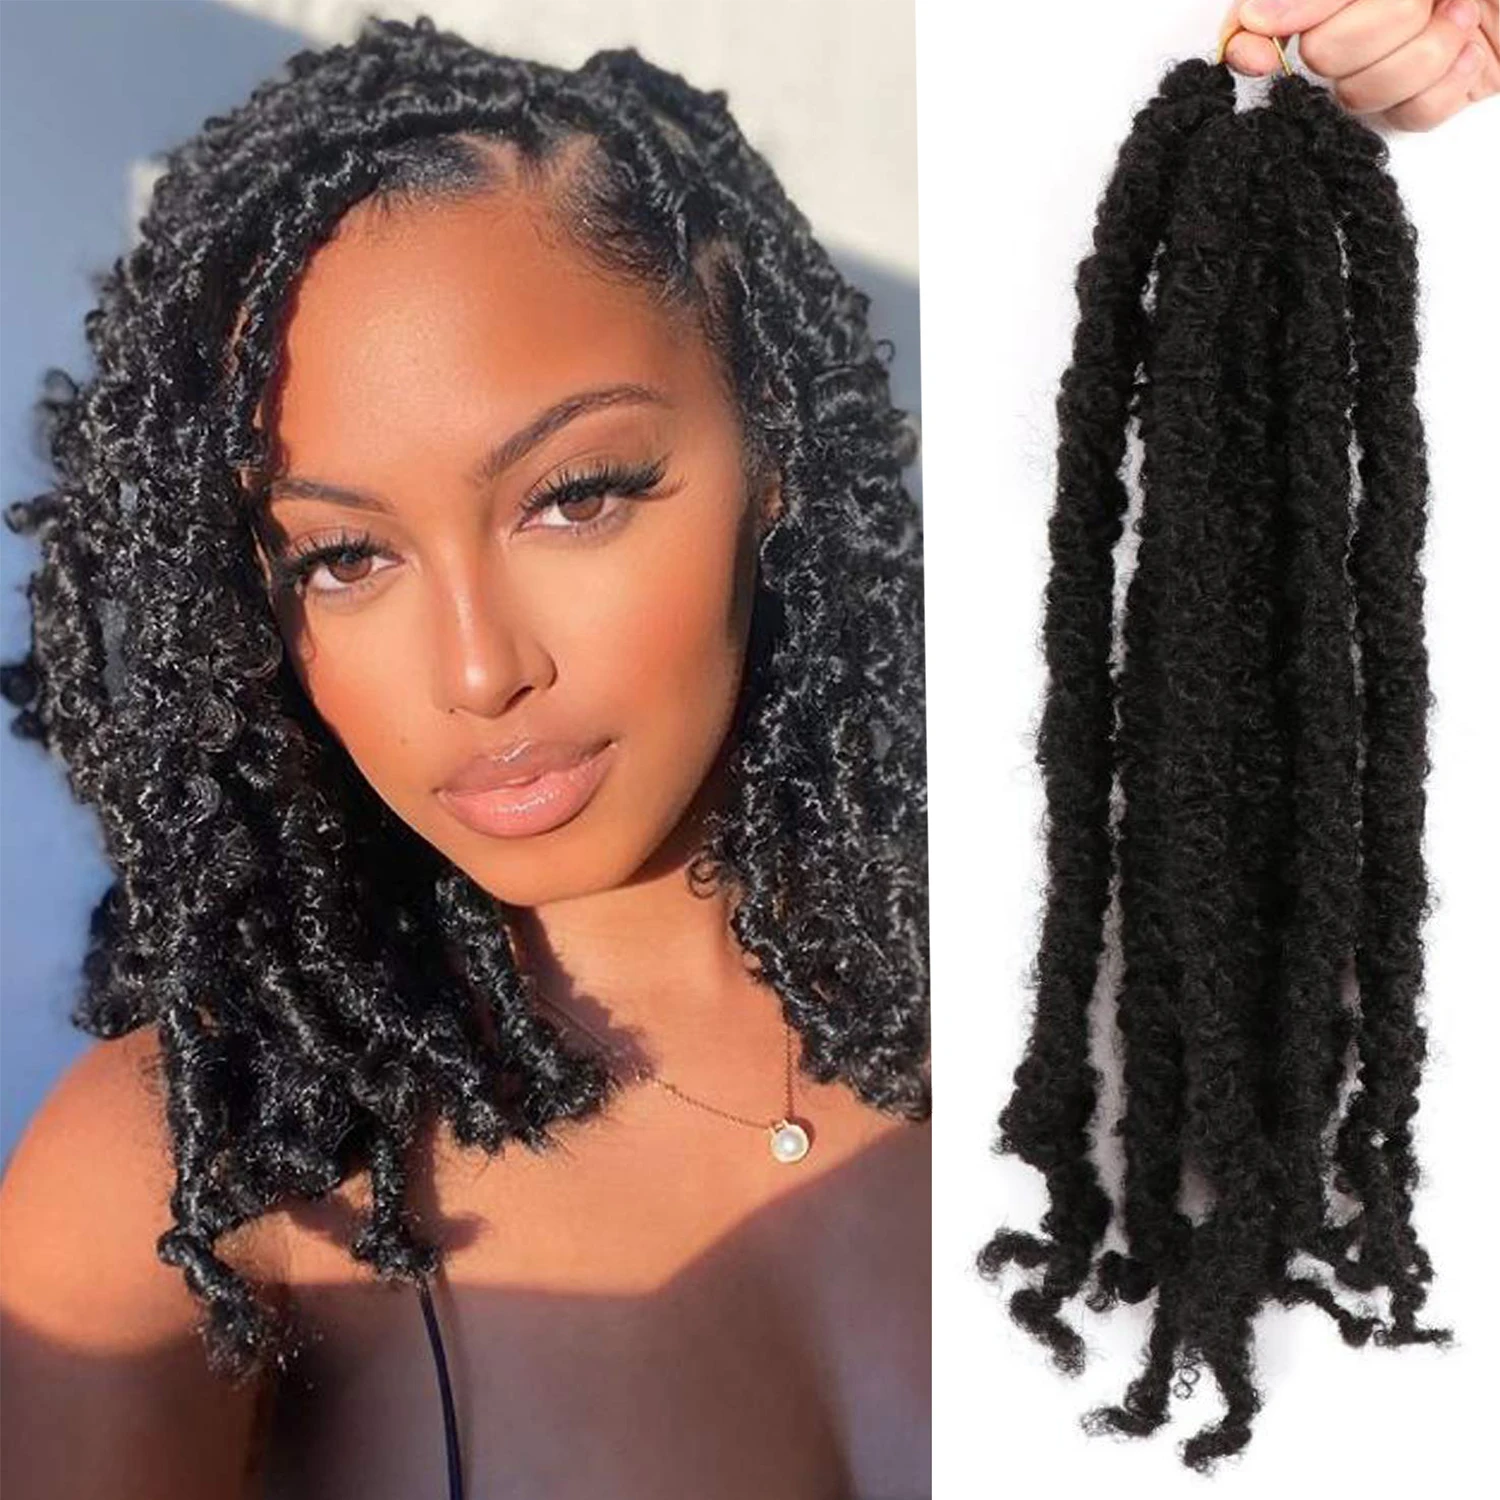 

DANSAMA 12inches New Butterfly Locs Crochet Hair Distressed Faux Locs Crochet Soft Locs Pre Looped Hair Extensions for Women